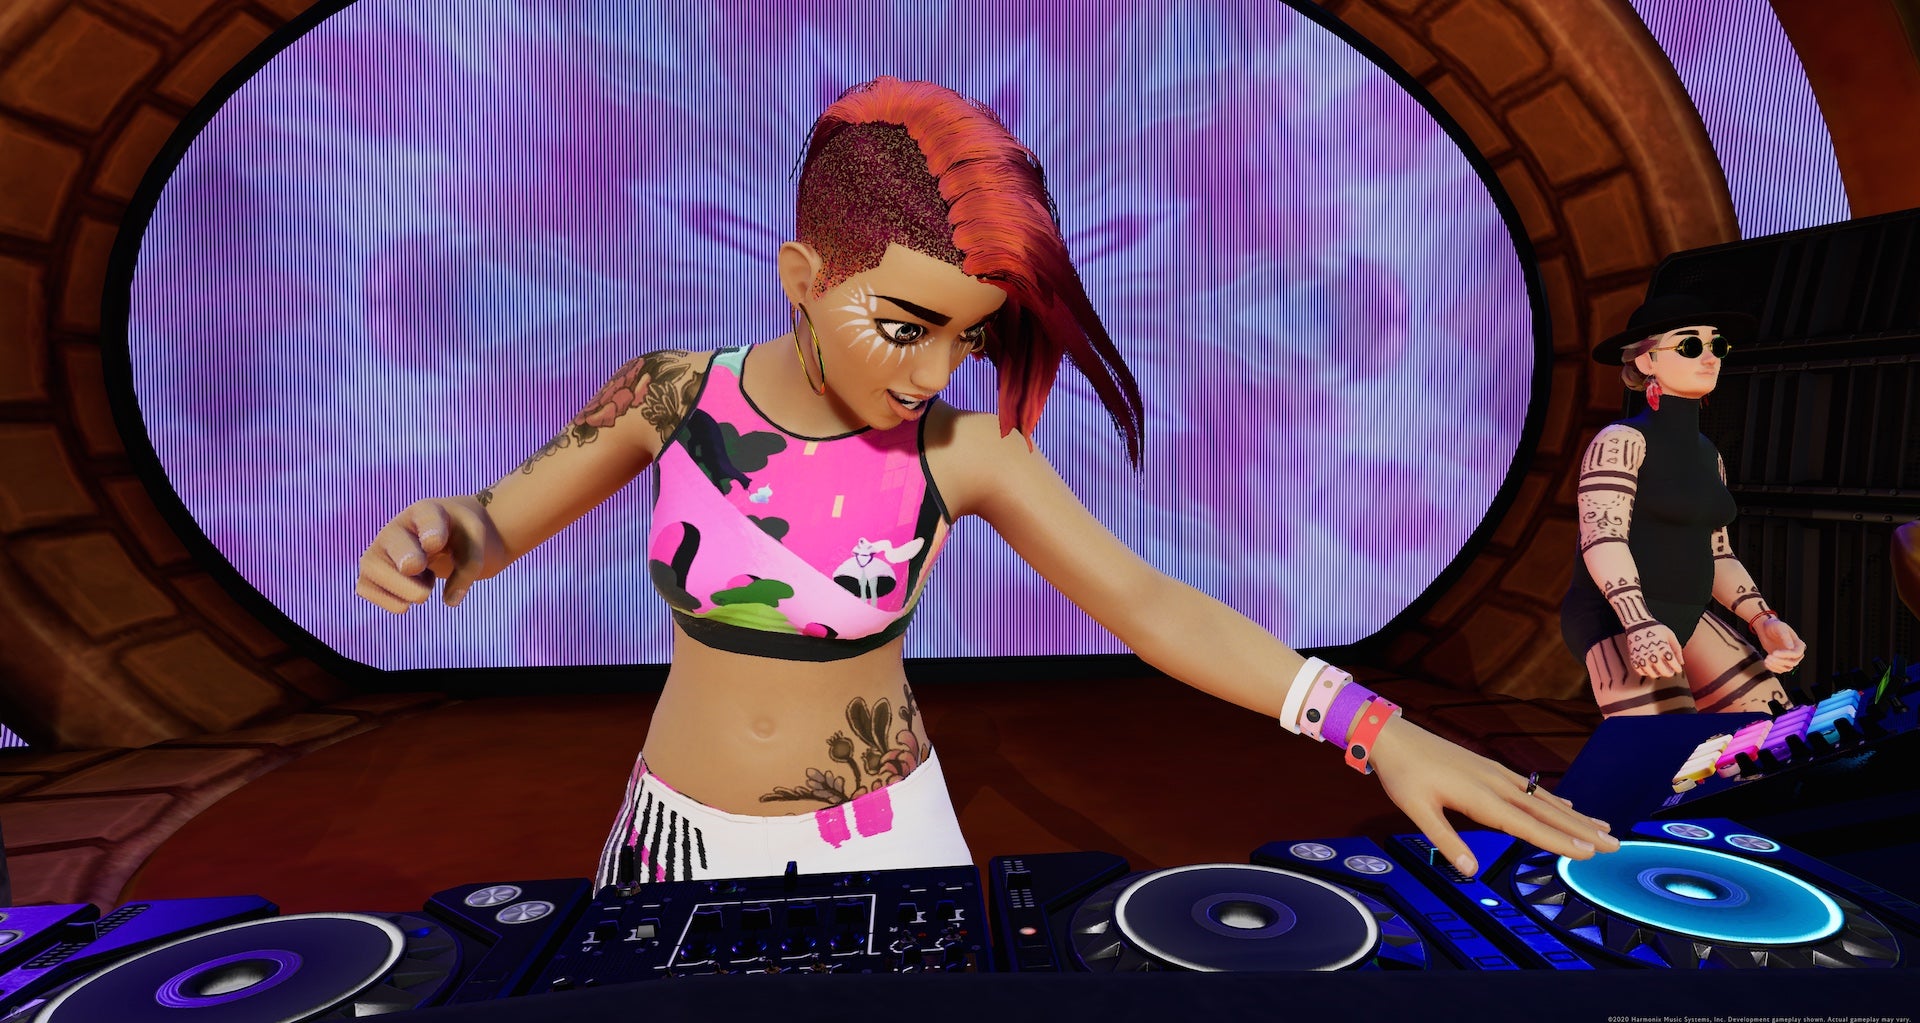 Image for Fuser Isn't Harmonix's DJ Hero, and It Won't Need a Plastic Turntable Either